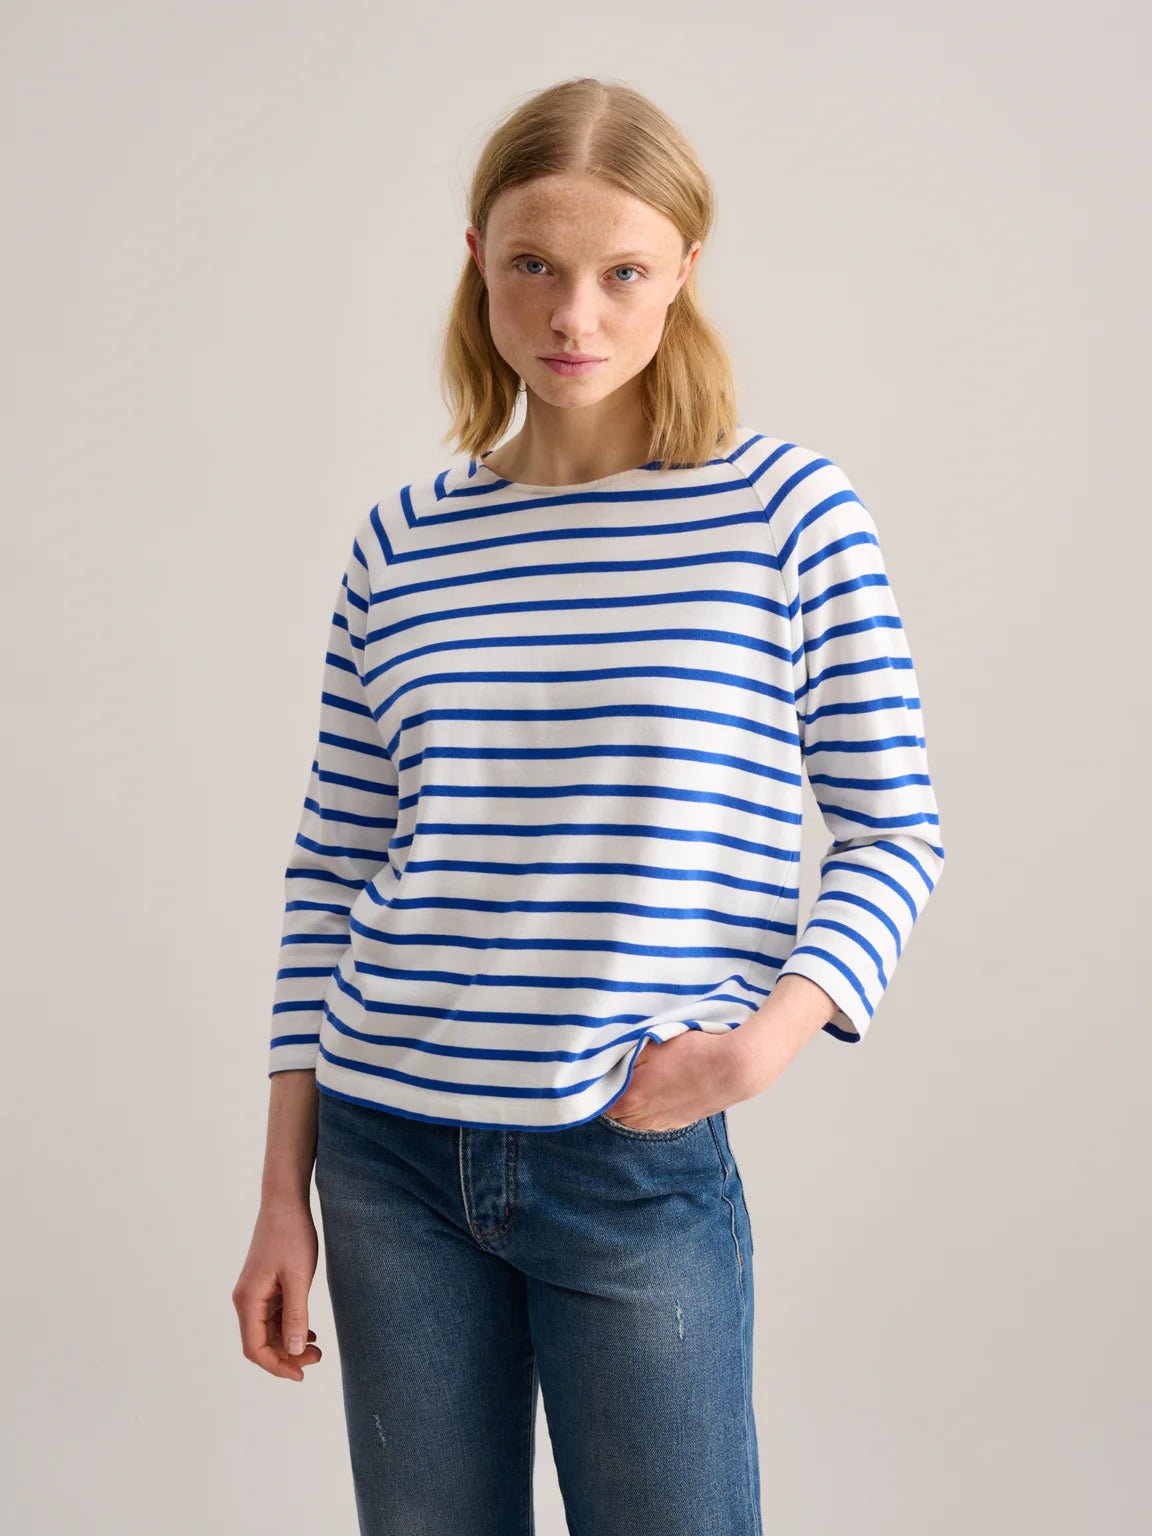 BELLEROSE - MAOW STRIPE T WITH BUTTON BACK - Annabelle 87